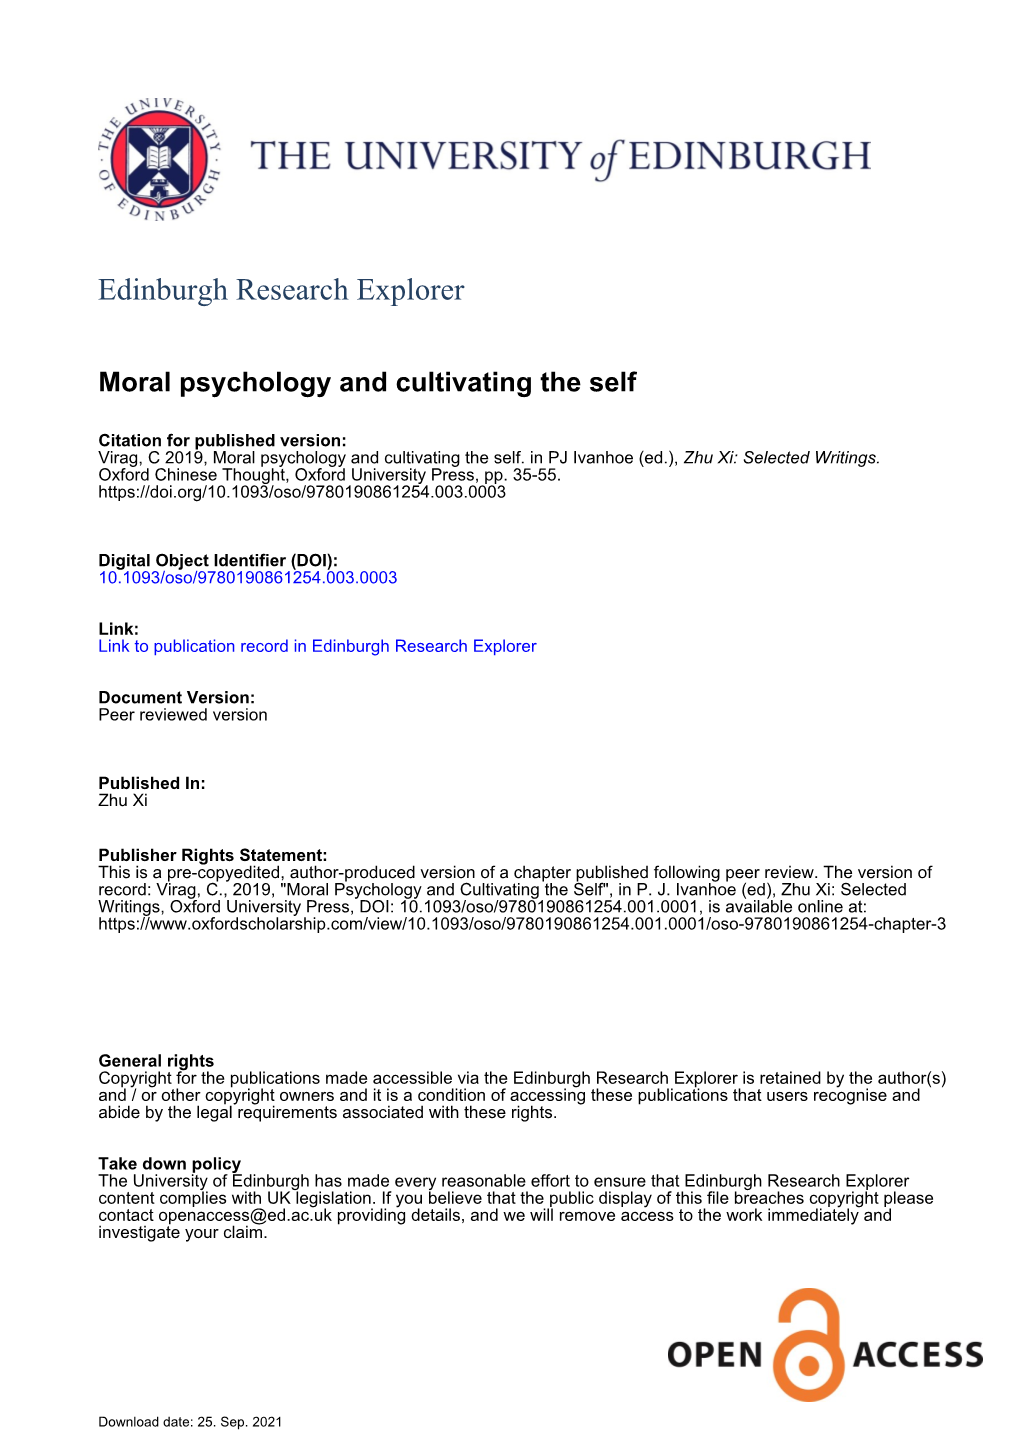 Moral Psychology and Cultivating the Self